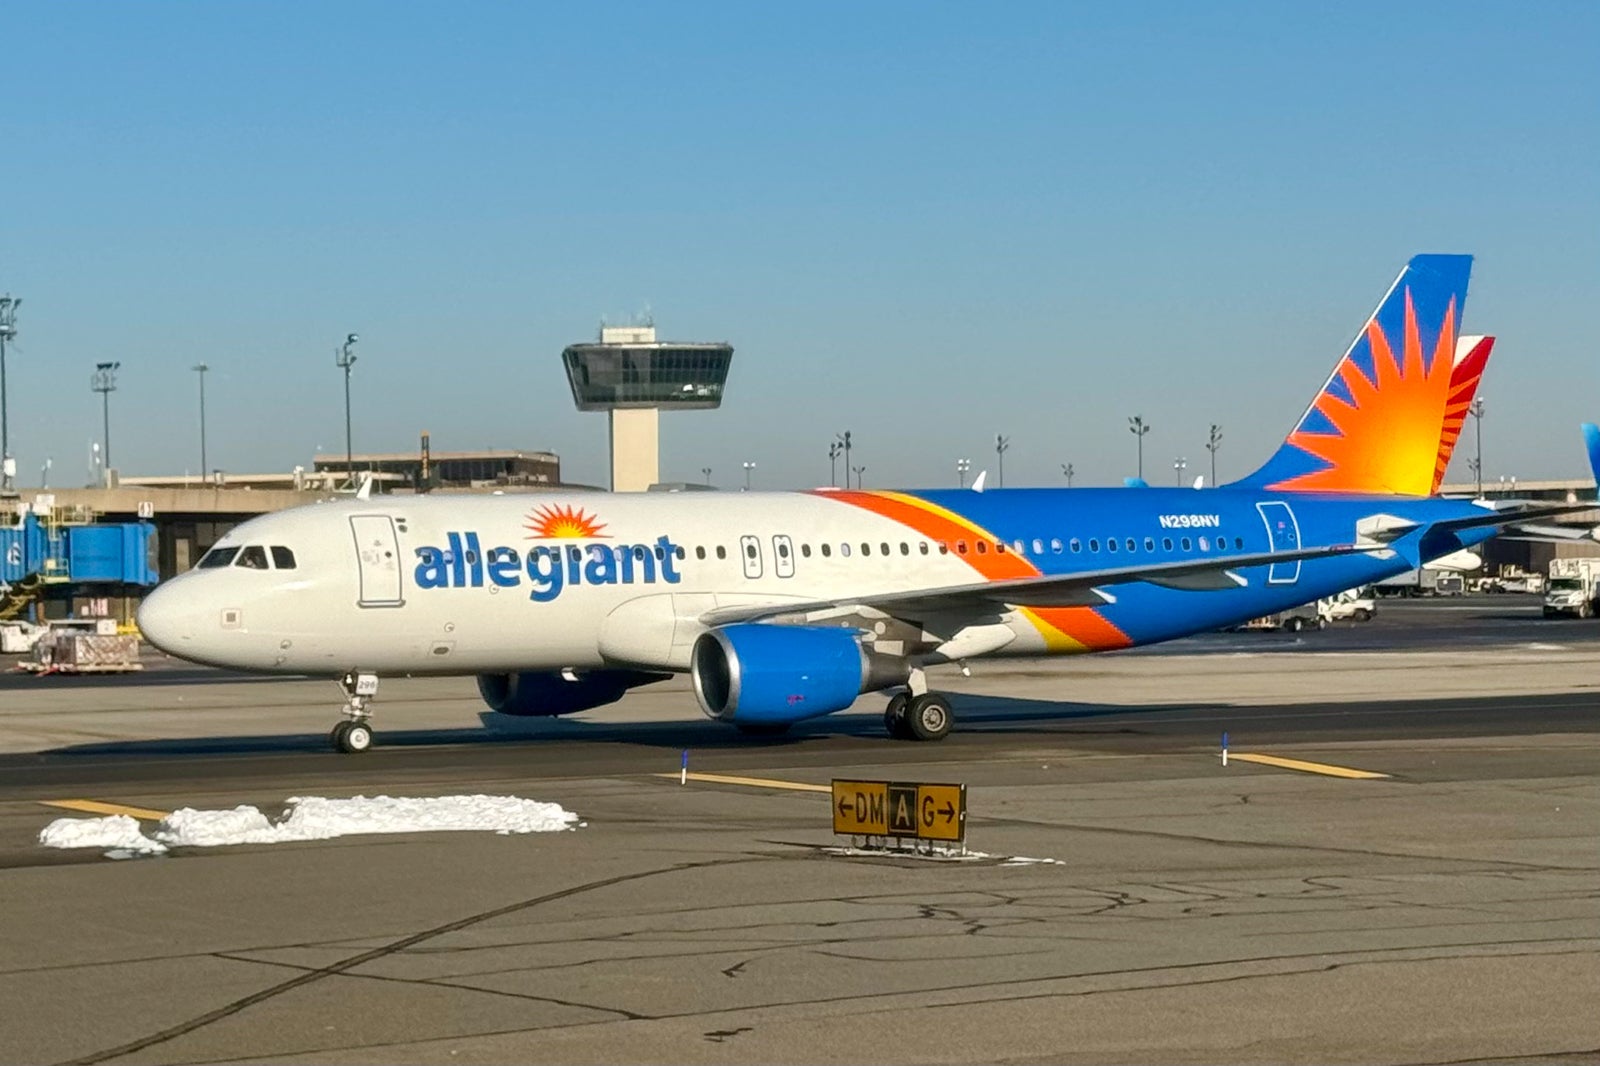 Allegiant unveils 8 new routes across 13 cities; intro fares from $39 one way